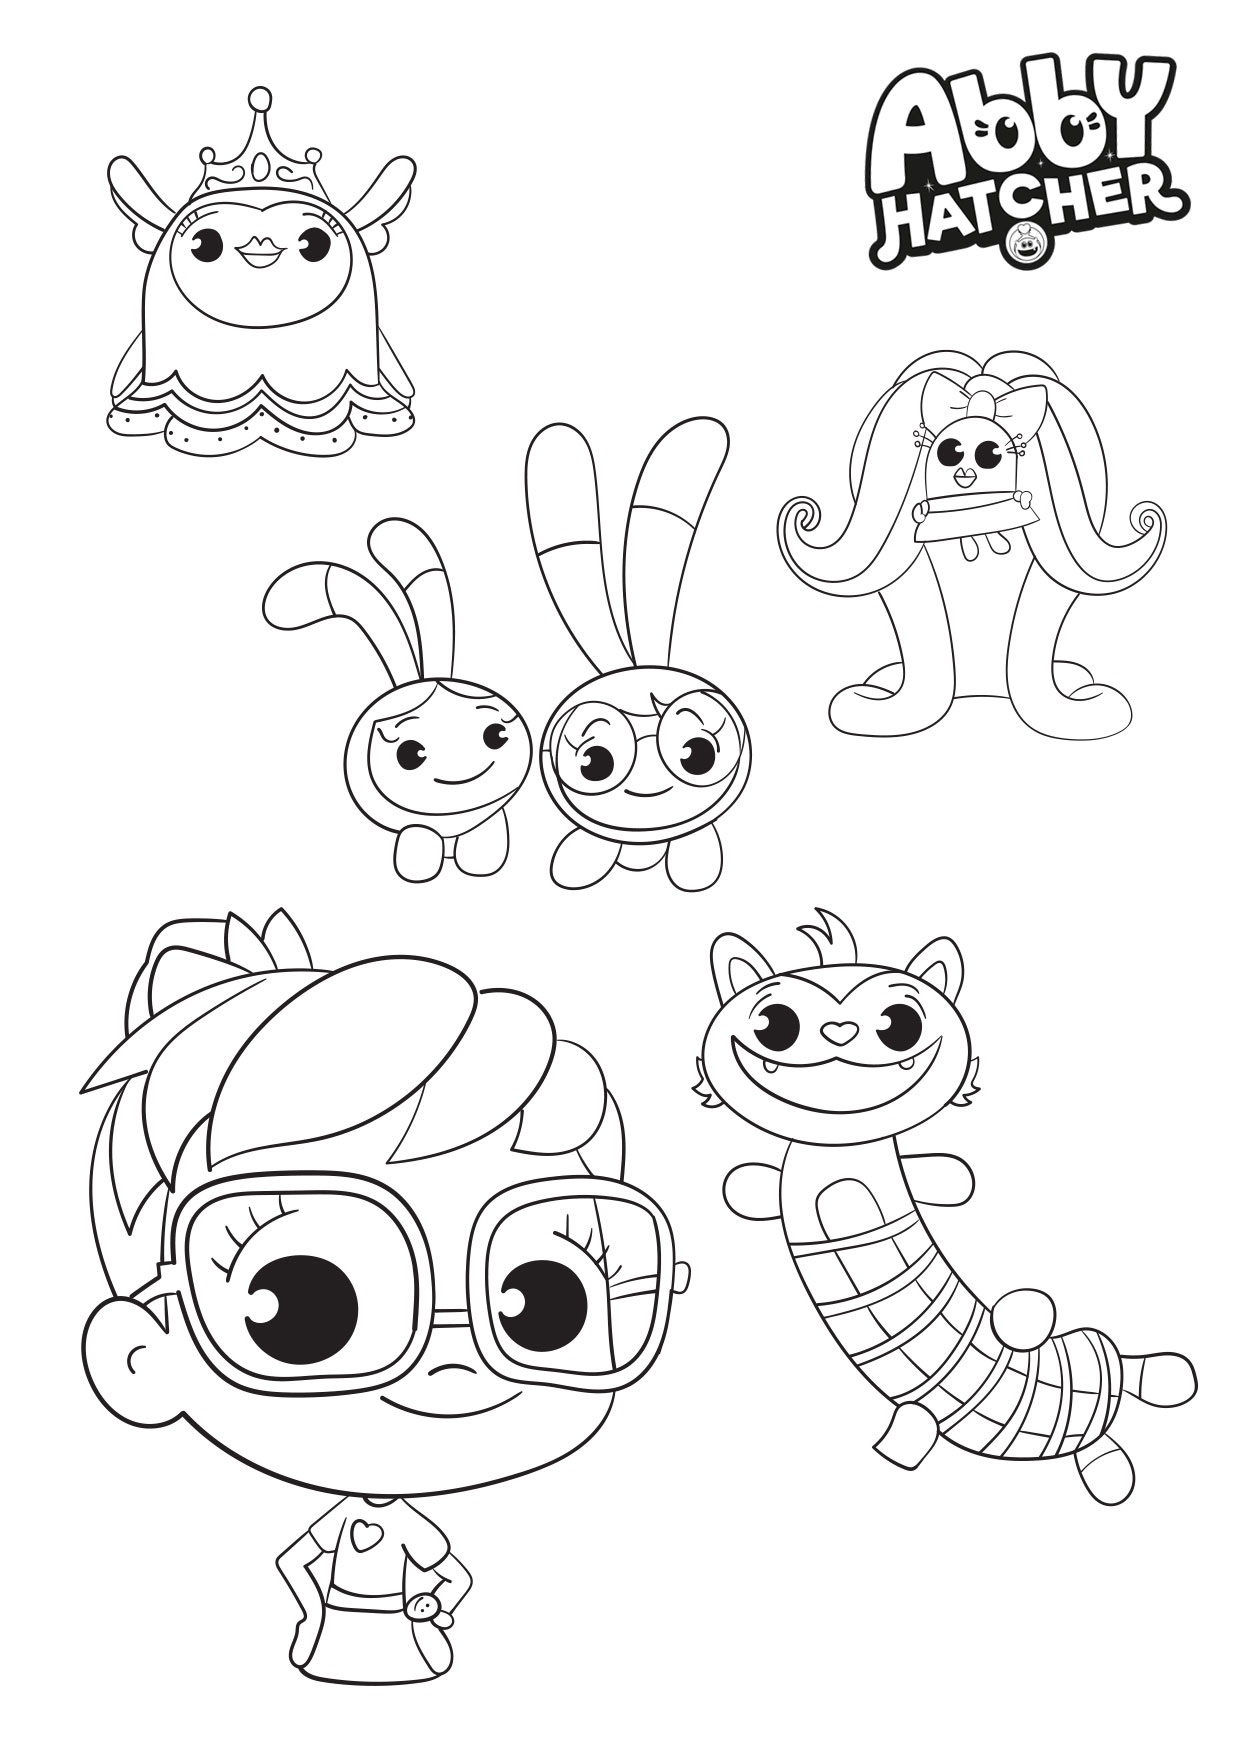 Abby Hatcher and Friends Coloring Page